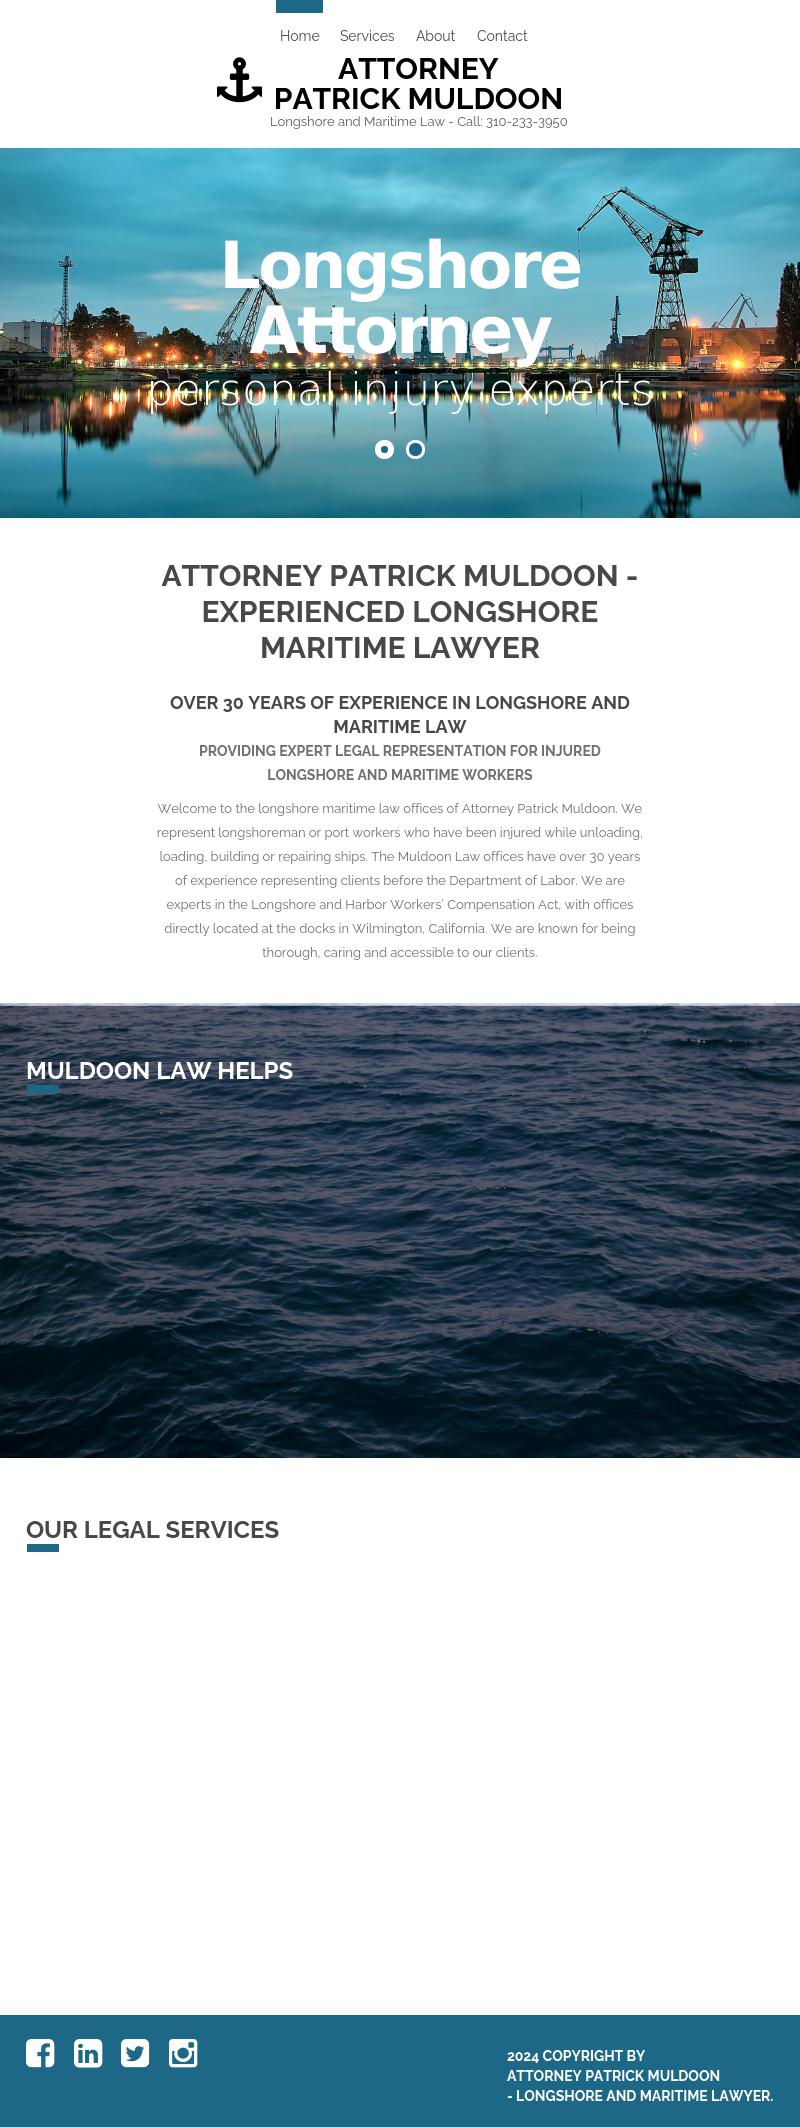 Muldoon Patrick Law Offices Of - Wilmington CA Lawyers